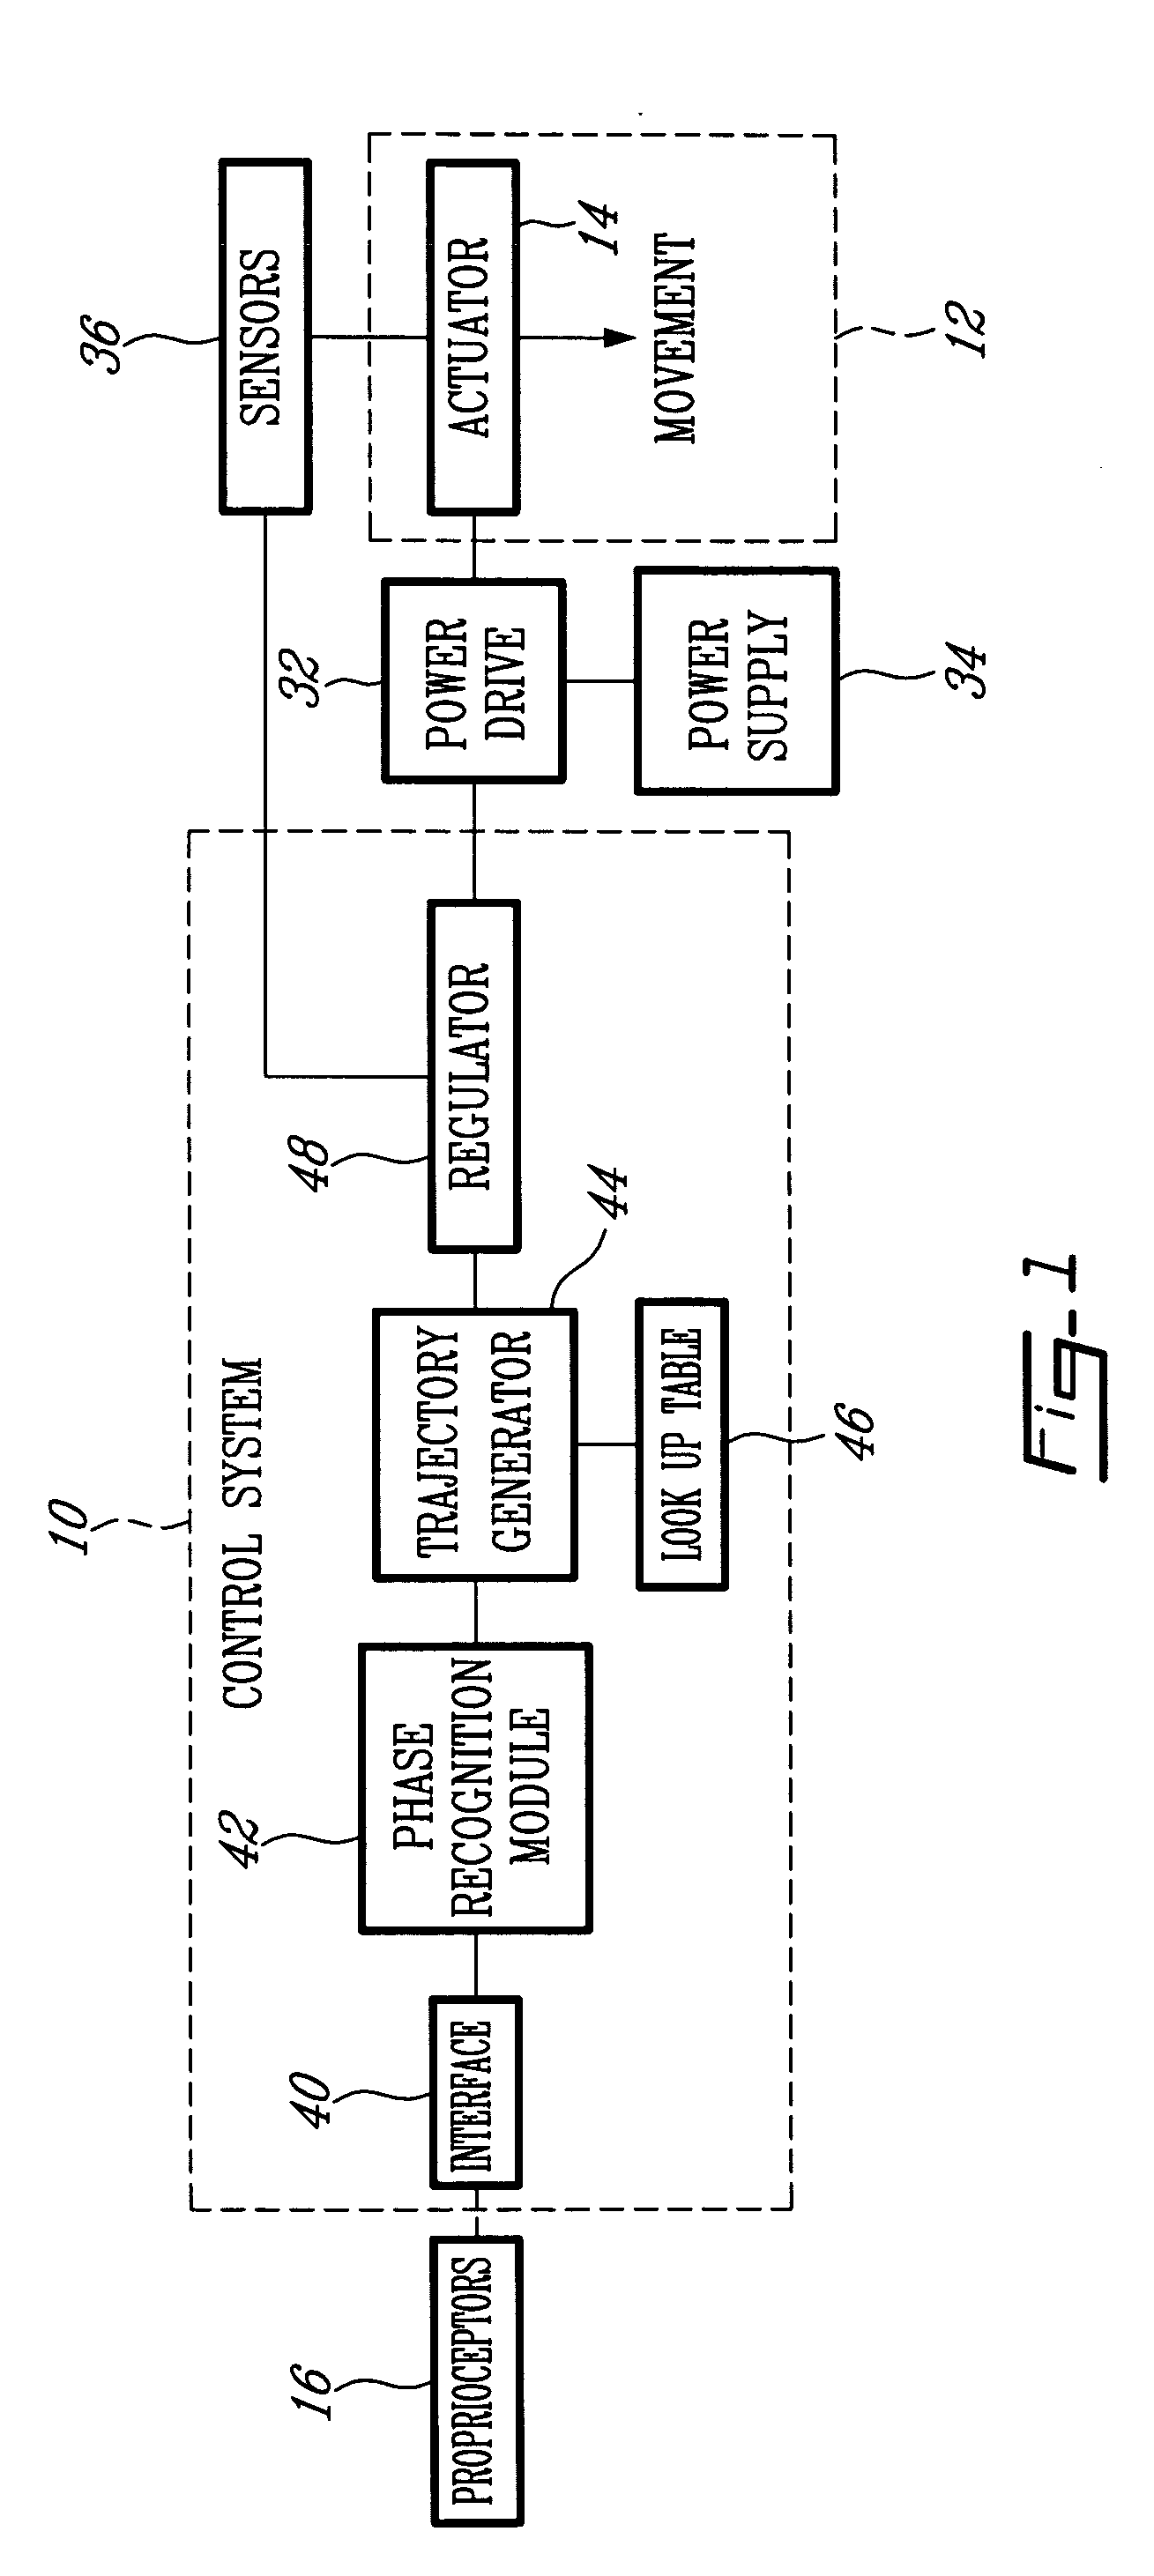 Control device and system for controlling an actuated prosthesis